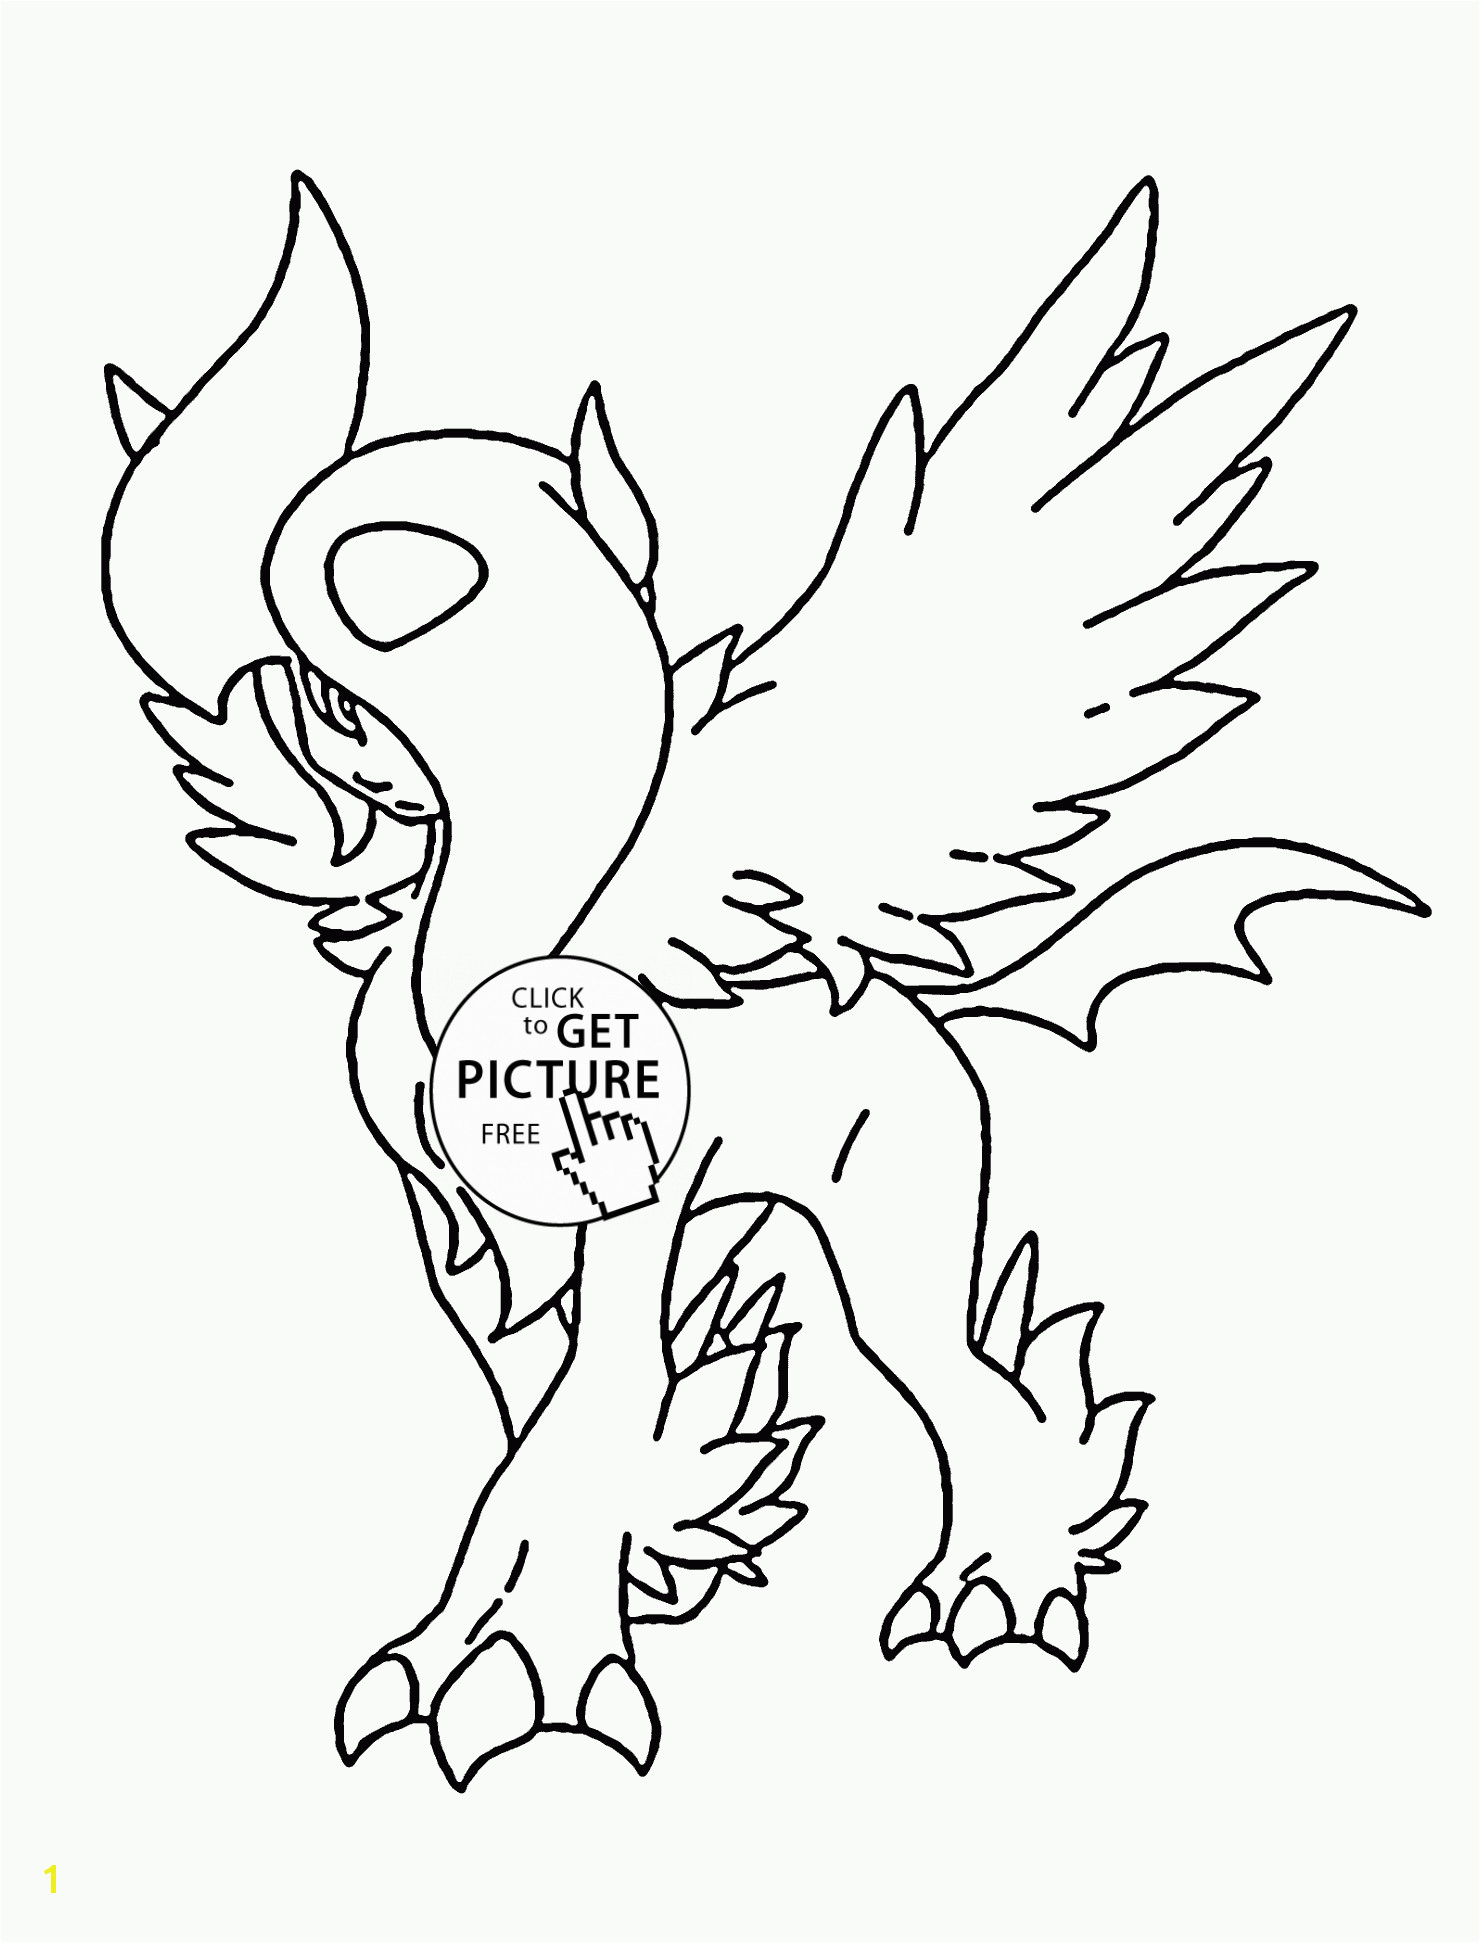 Hydreigon Coloring Pages 52 Inspirational Hydreigon Coloring Pages – Free Coloring Sheets